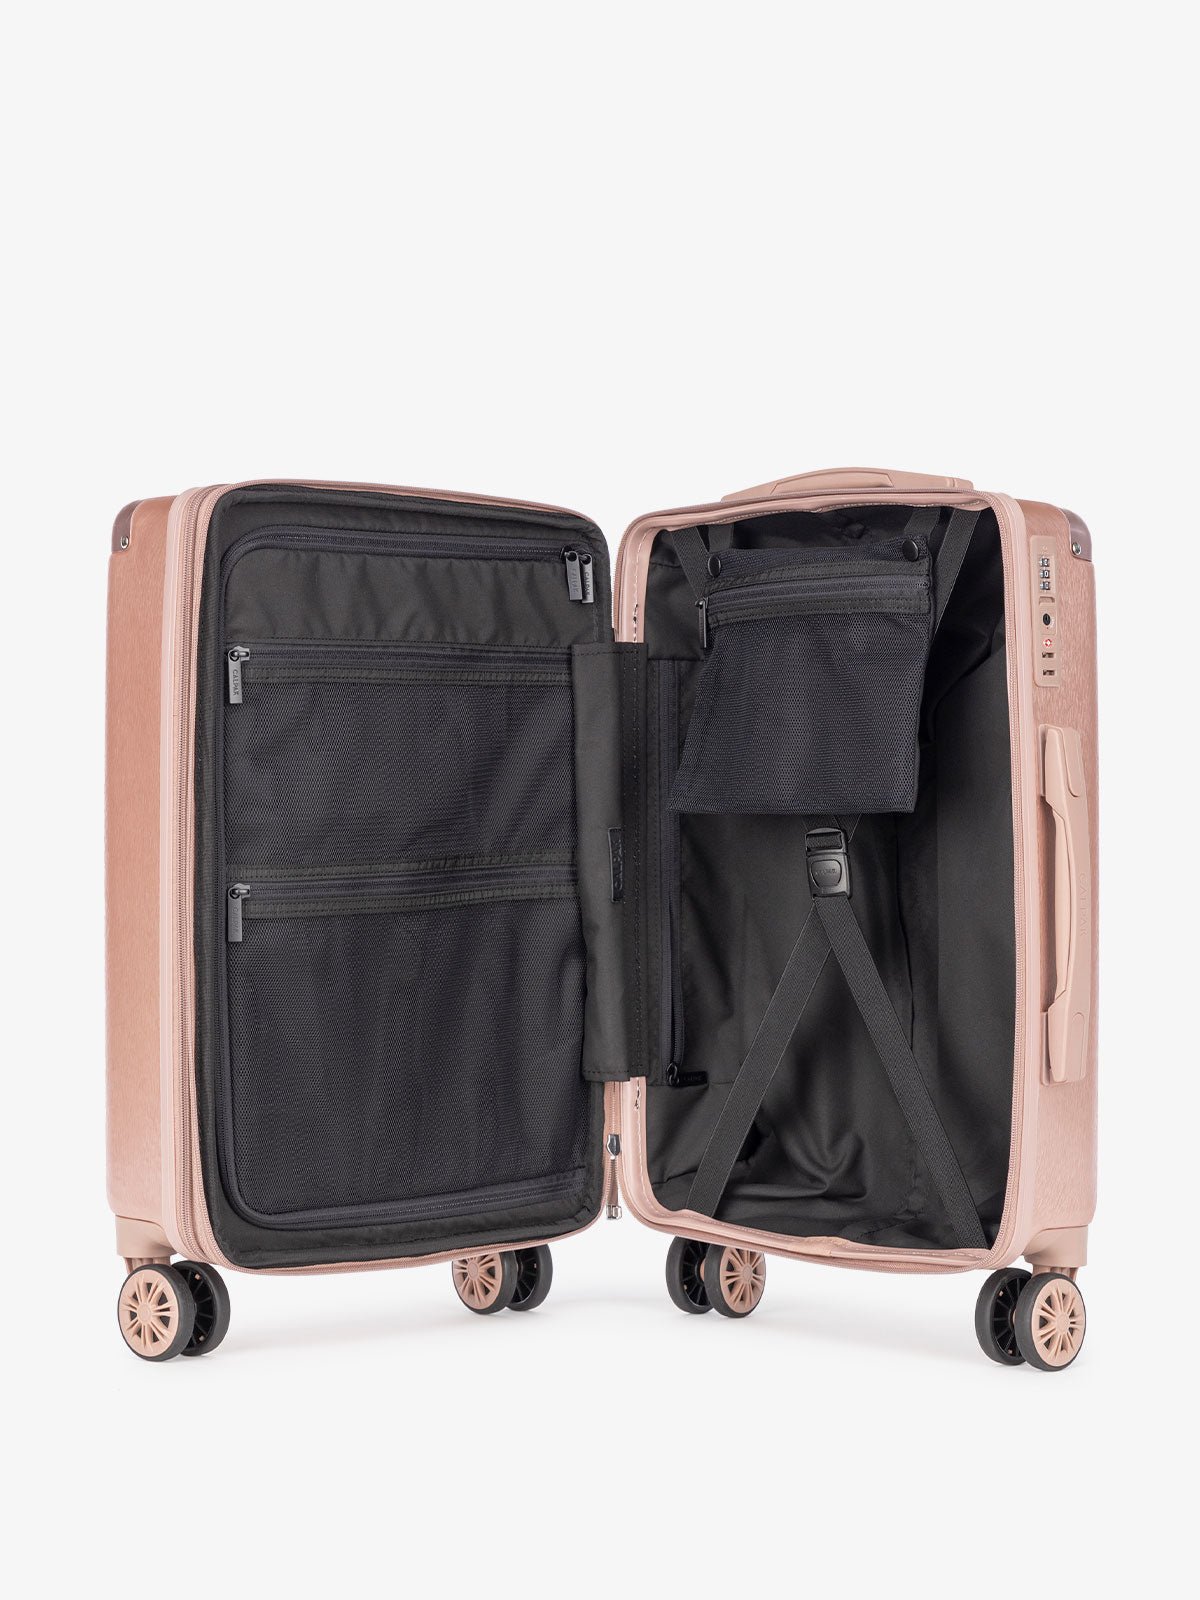 rose gold CALPAK Ambeur hard shell carry on luggage with compression straps